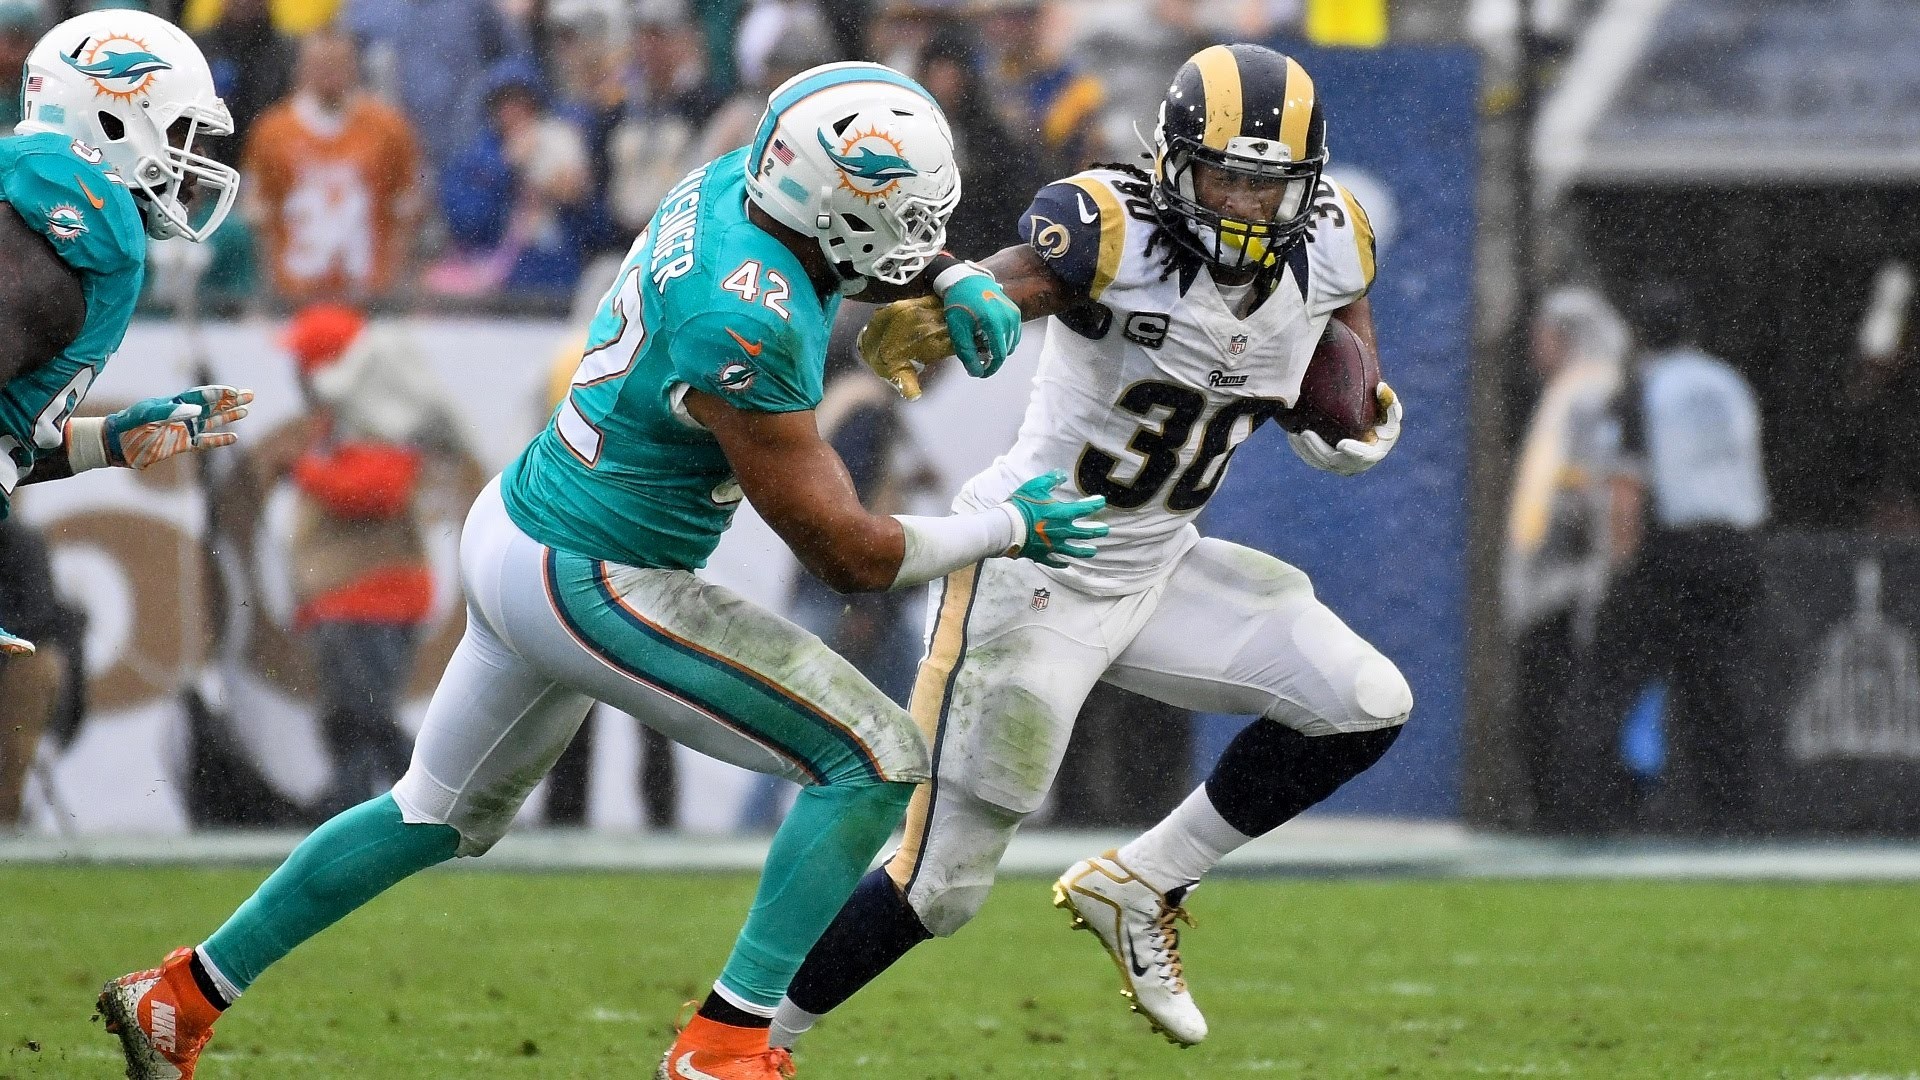 Todd Gurleys Sophomore Slump The guys take a closer look at Rams RB Todd Gurleys underwhelming